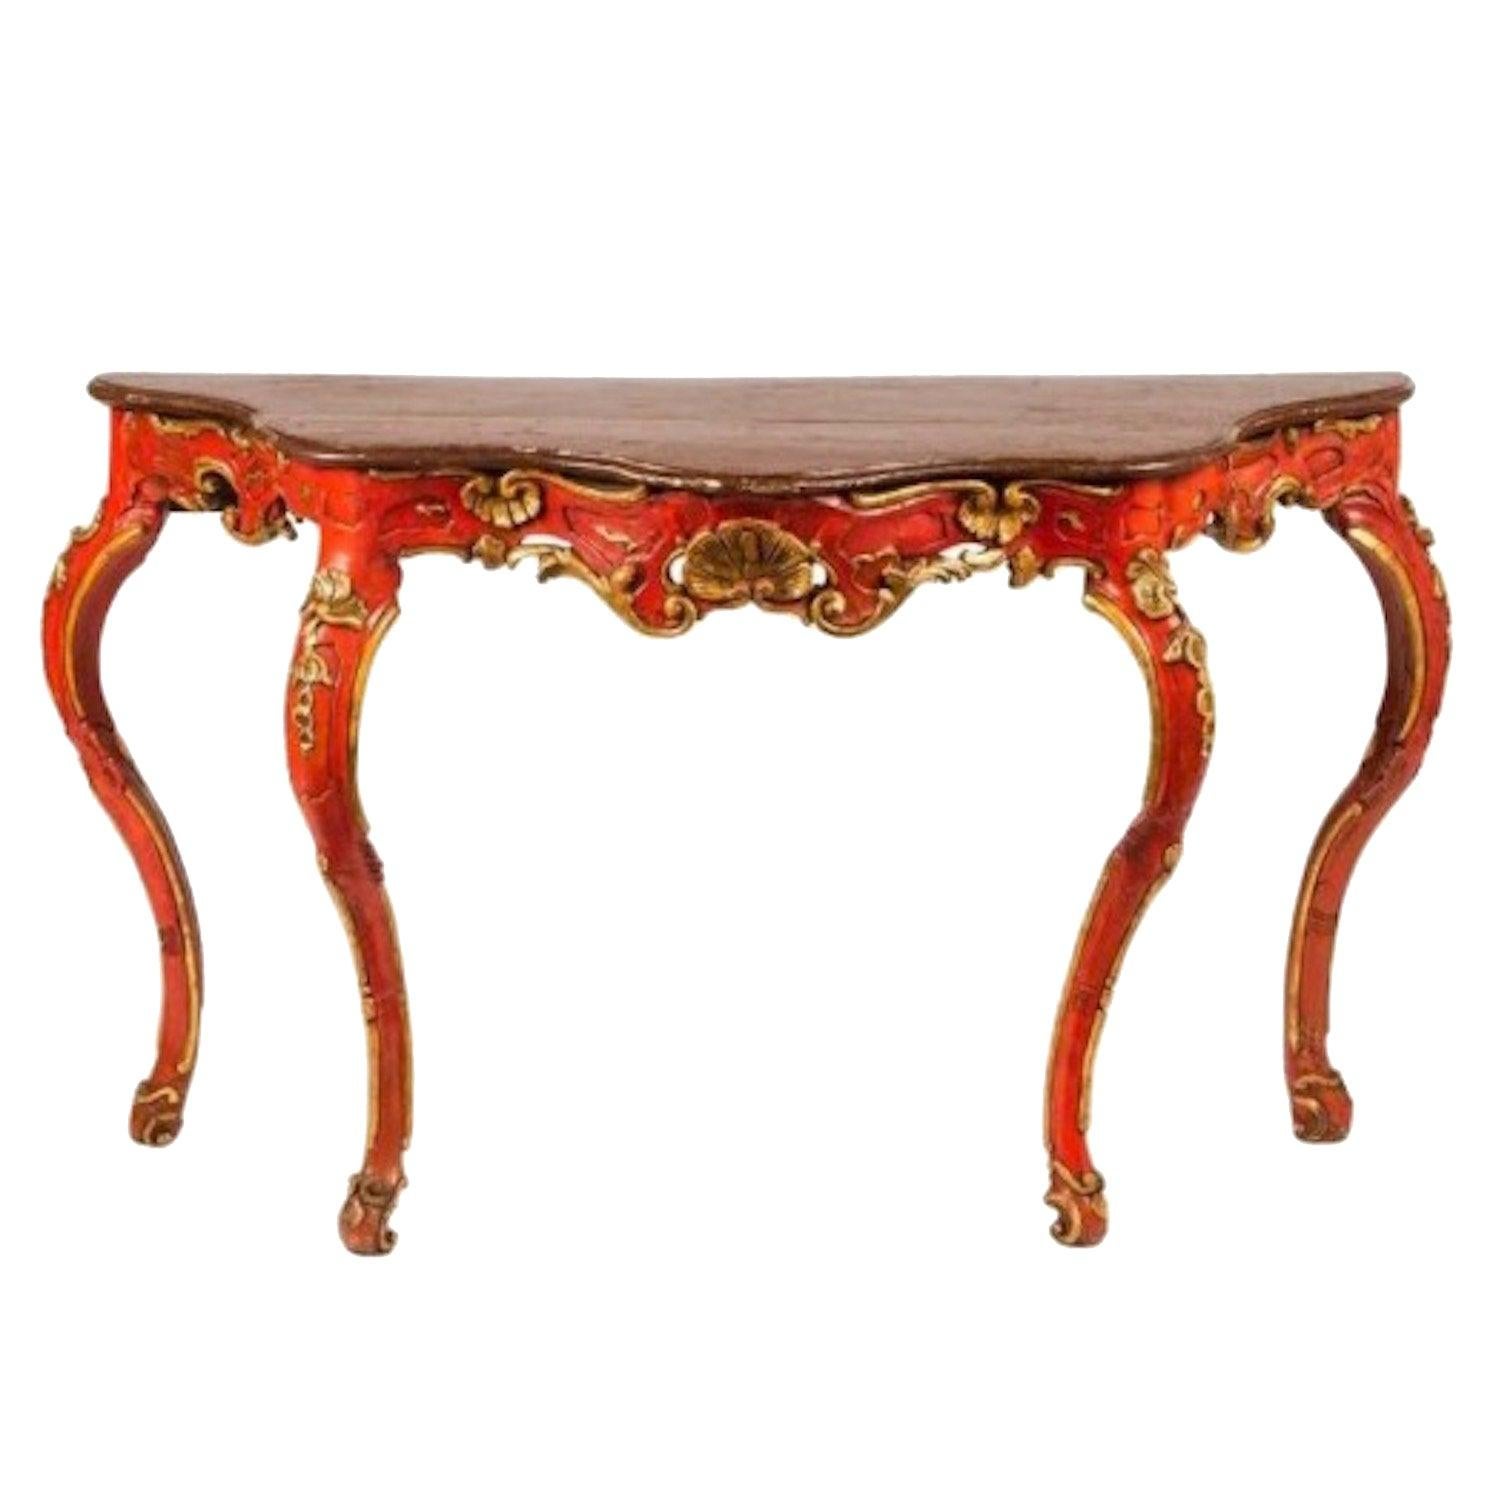 Italian 18th Century Venetian Red Painted Parcel-Gilt Serpentine Console Table For Sale